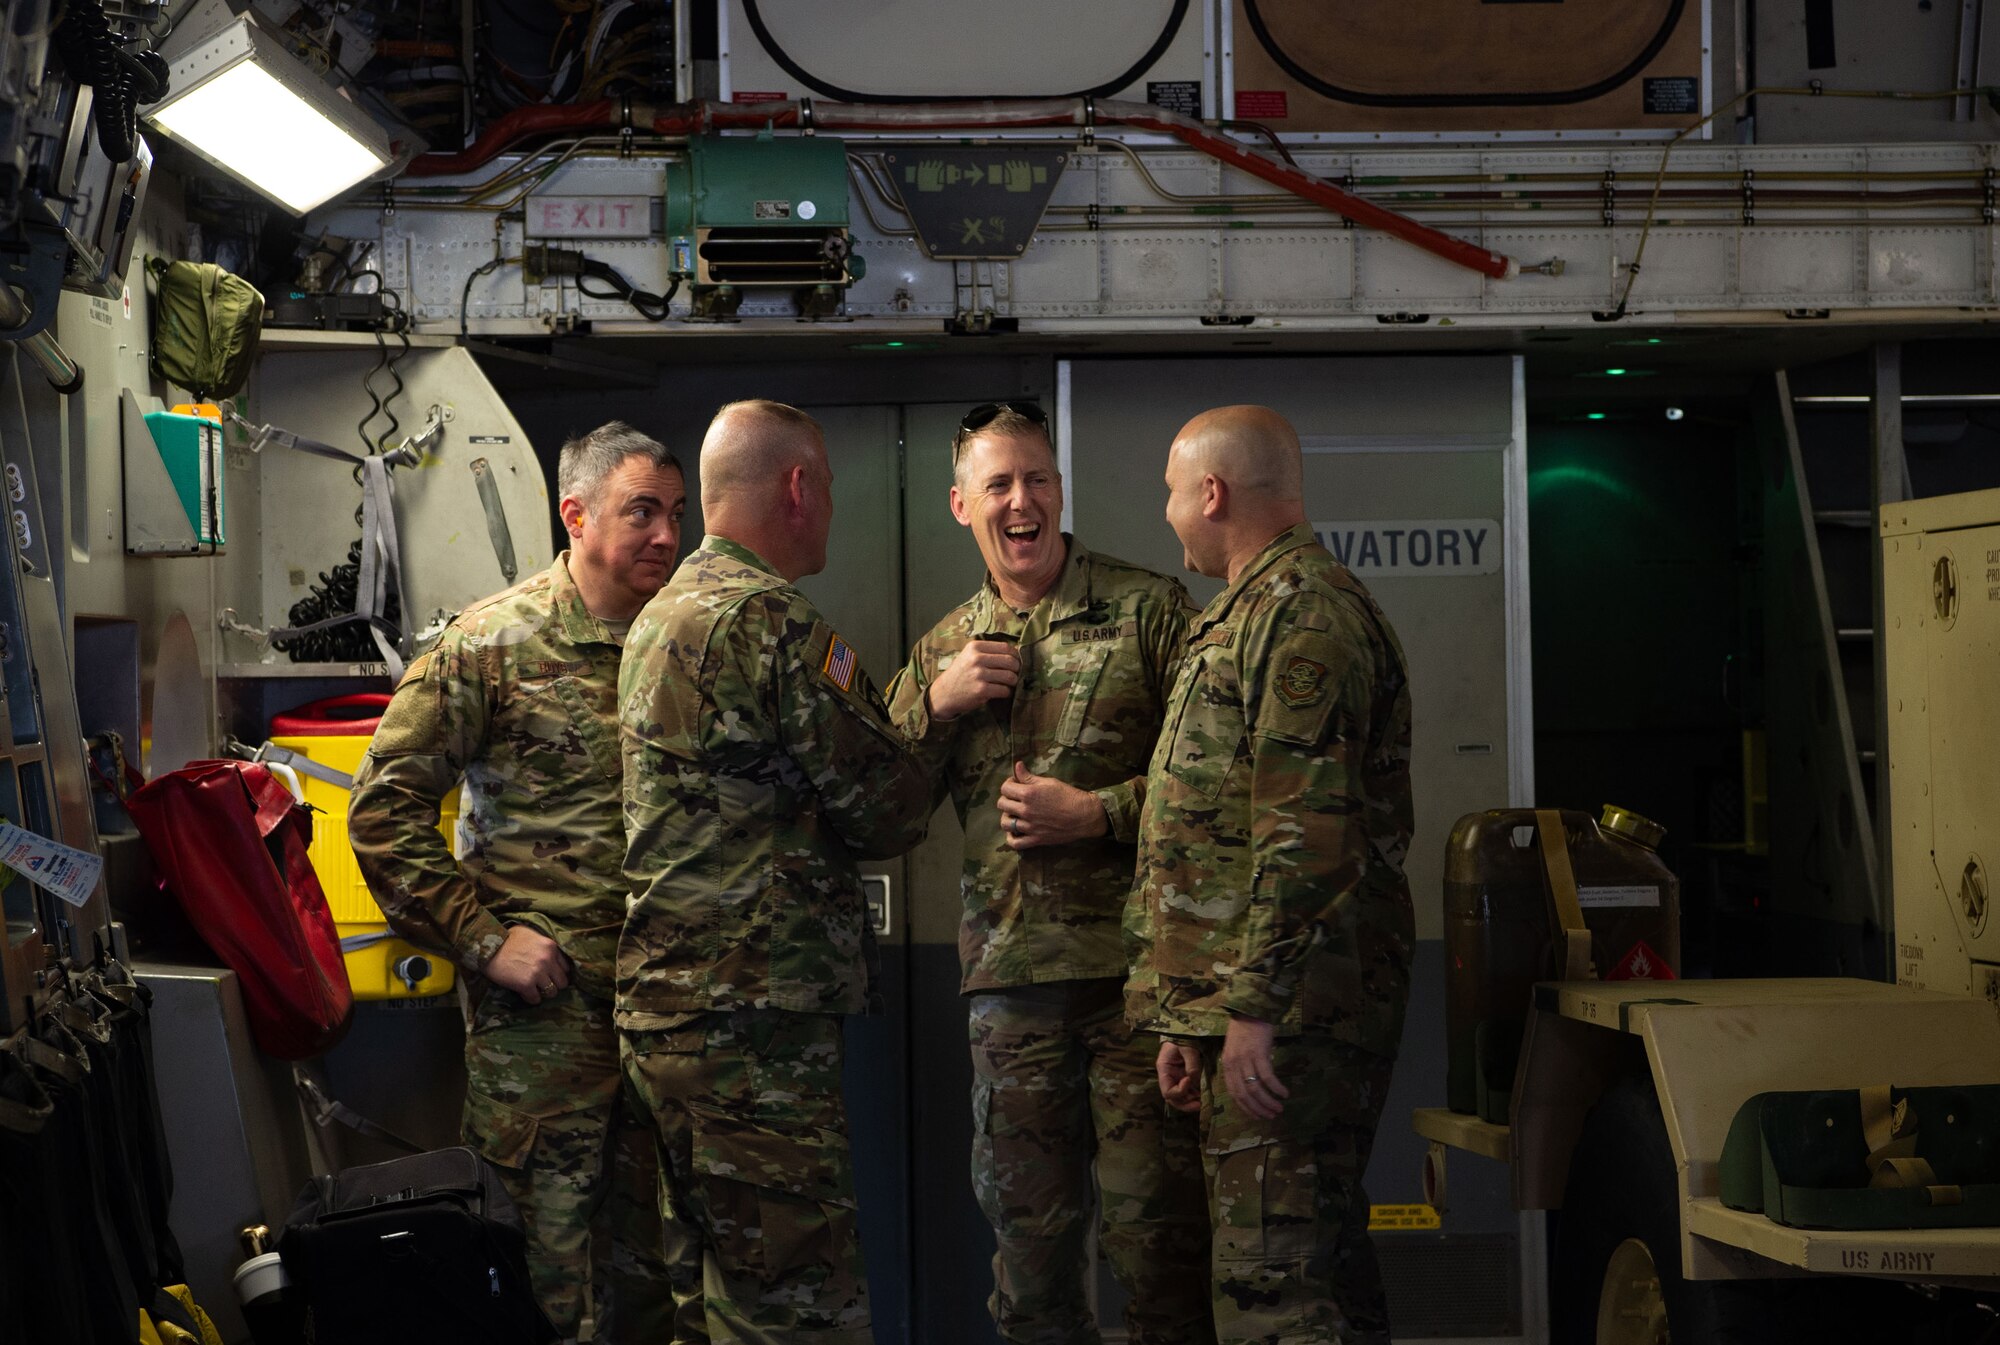 From right, U.S. Air Force Chief Master Sgt. Robert Schultz, 62nd Airlift Wing command chief; U.S. Army Col. Skye Duncan, Joint Base Lewis-McChord (JBLM) commander; U.S. Army Command Sgt. Maj. Timothy Marble, JBLM command sergeant major; and U.S. Air Force Chief Master Sgt. Joel Buys, JBLM senior enlisted leader and 627th Air Base Group command chief, talk onboard a C-17 Globemaster III at JBLM, Wash., Oct. 1, 2019. The purpose of the flight was to provide training opportunities for Soldiers assigned to the 51st Expeditionary Signal Battalion, 35th Signal Brigade, and 7th Airlift Squadron pilots and loadmasters. (U.S. Air Force photo by Senior Airman Tryphena Mayhugh)